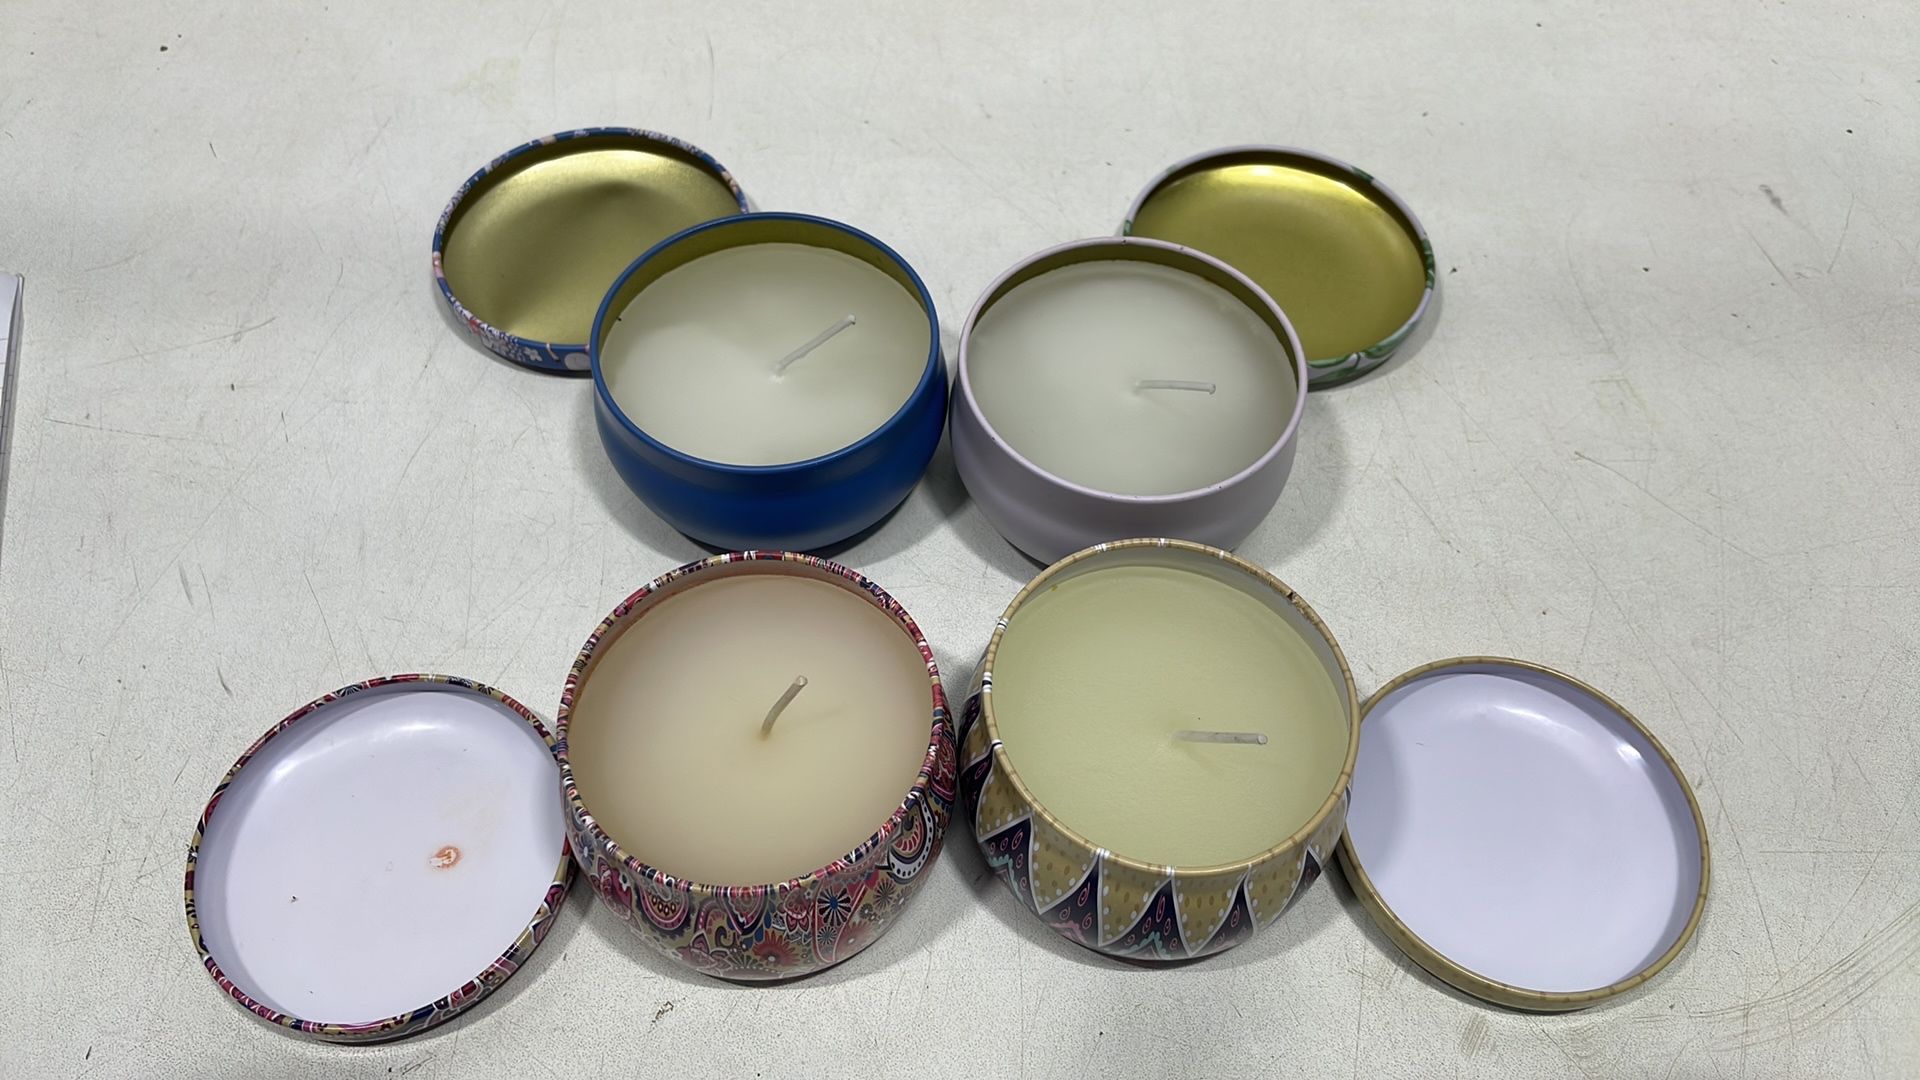 2 x Boxes with Total 150 Scented Candles | Various Designs of Tins Filled with Scented Candles - Image 2 of 4